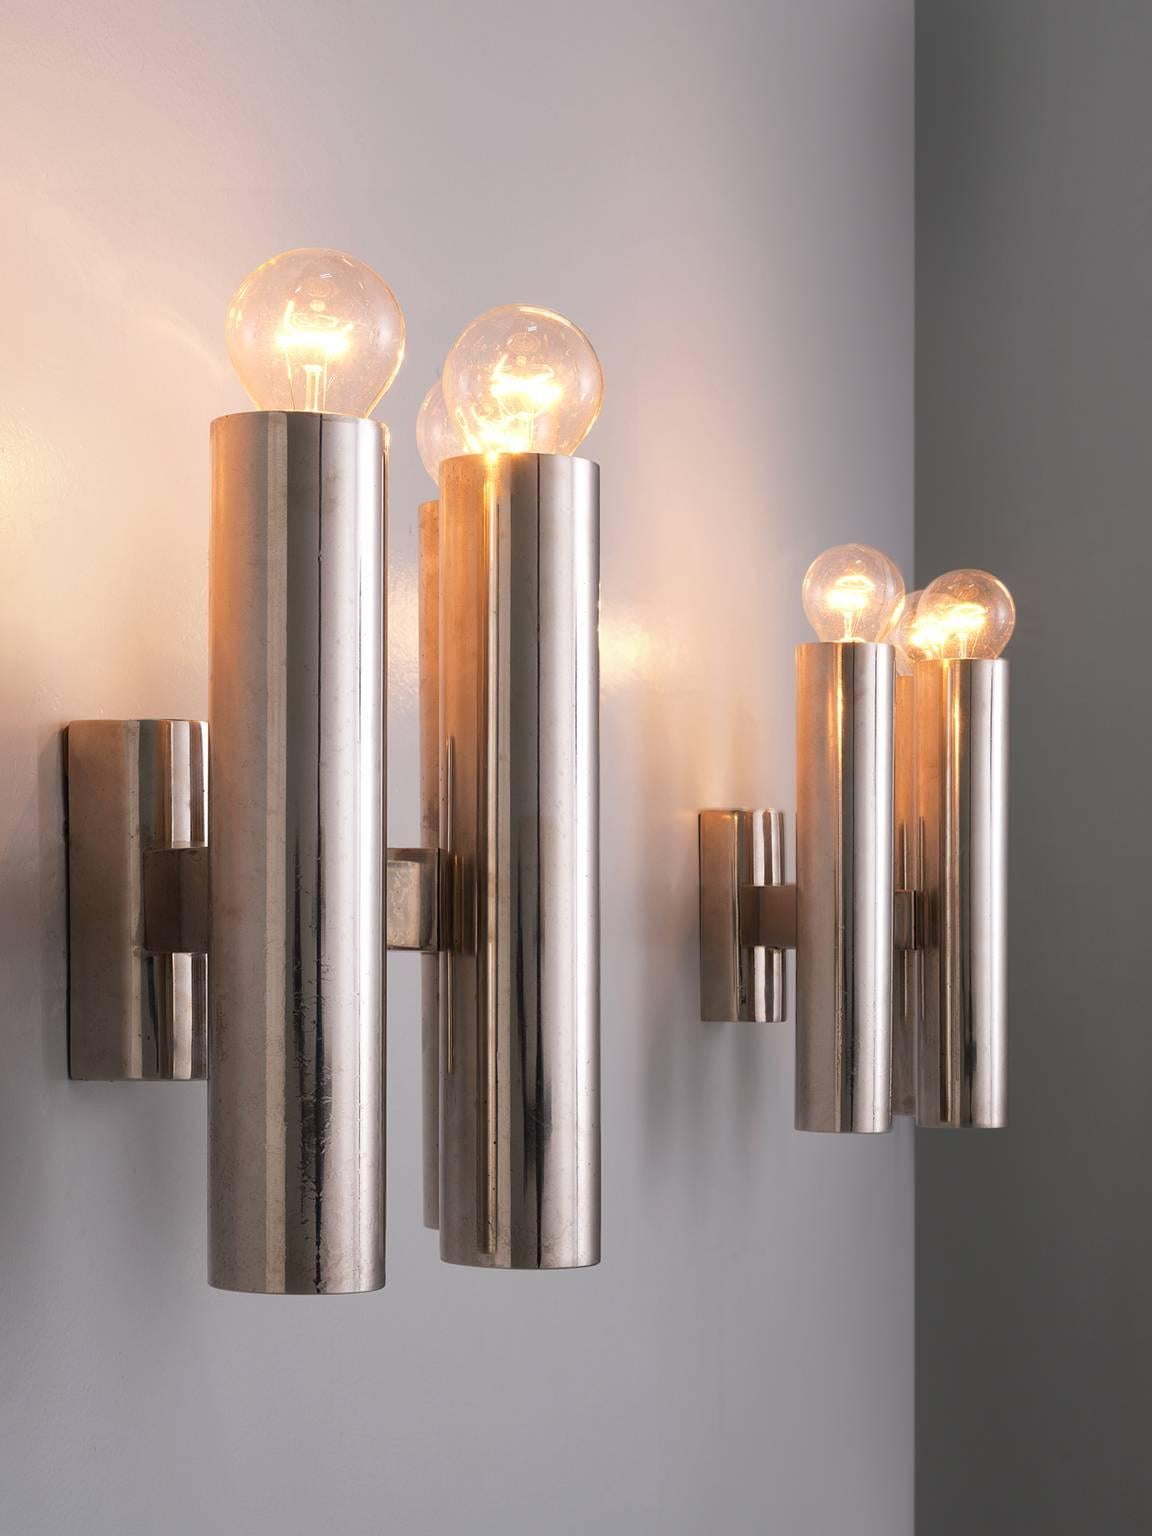 Wall lights, chromed metal, Europe, 1970s.

Large set of wall lights. Each light consist of three cylindrical chrome candle holder inspired tubes, which are held by a chrome frame. The alignment of these three lights are formed as if in a